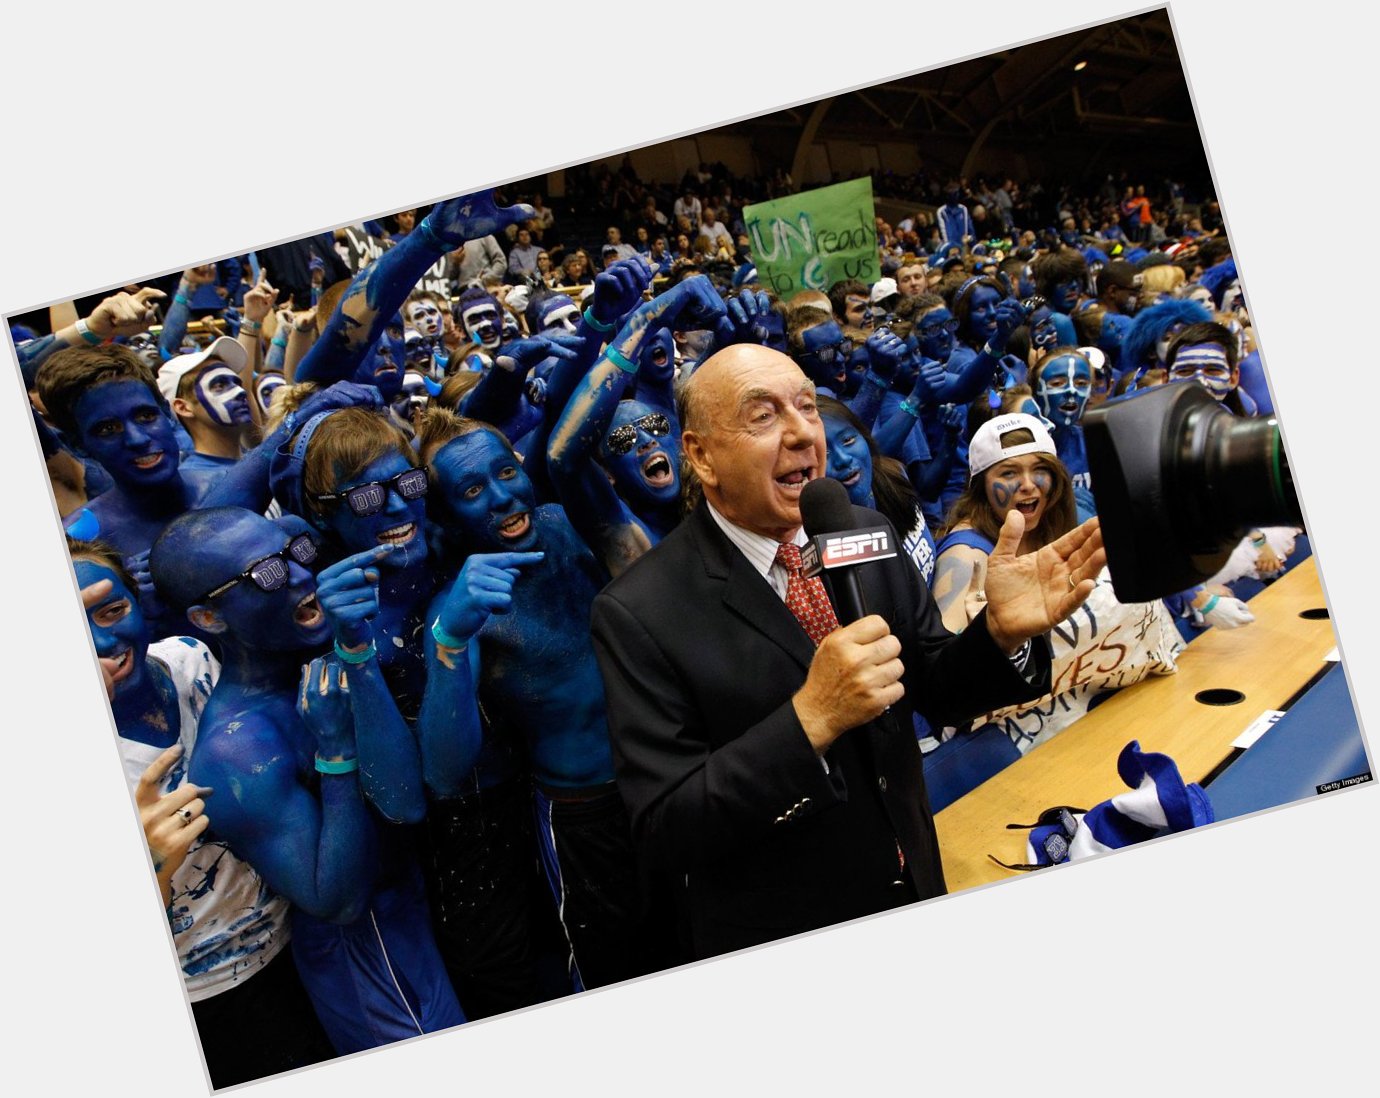 Happy Birthday to Dick Vitale who turns 78 today! 